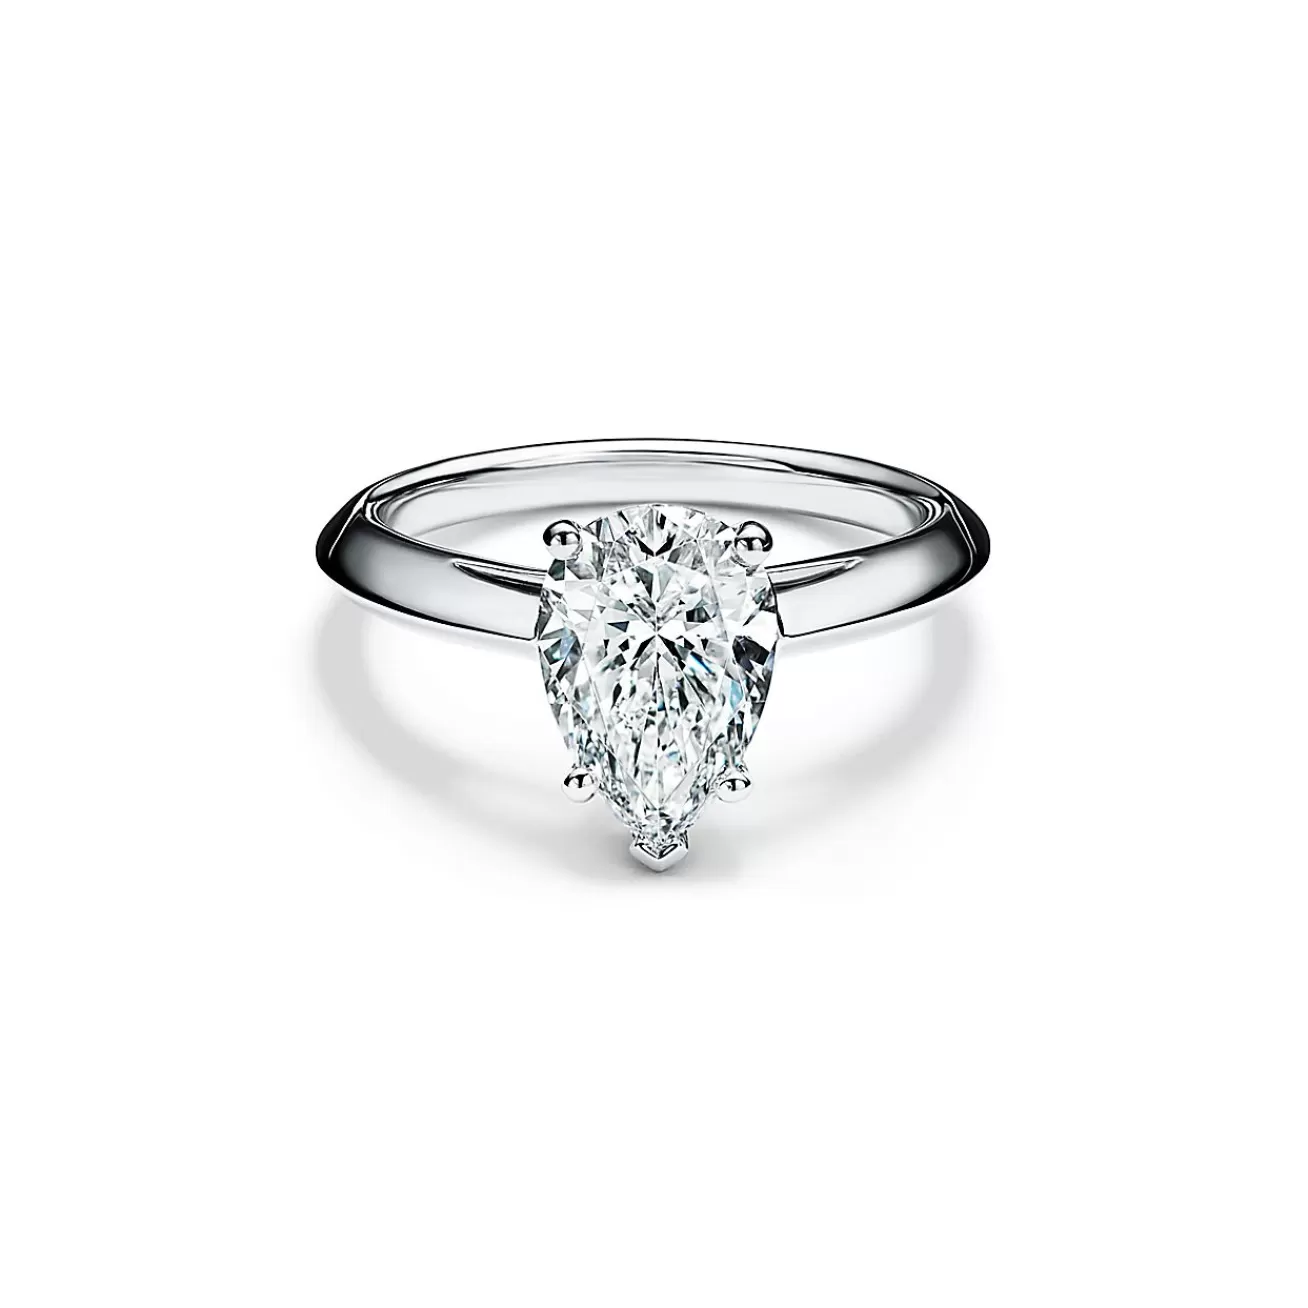 Tiffany & Co. Pear-shaped diamond engagement ring in platinum. | ^ Engagement Rings